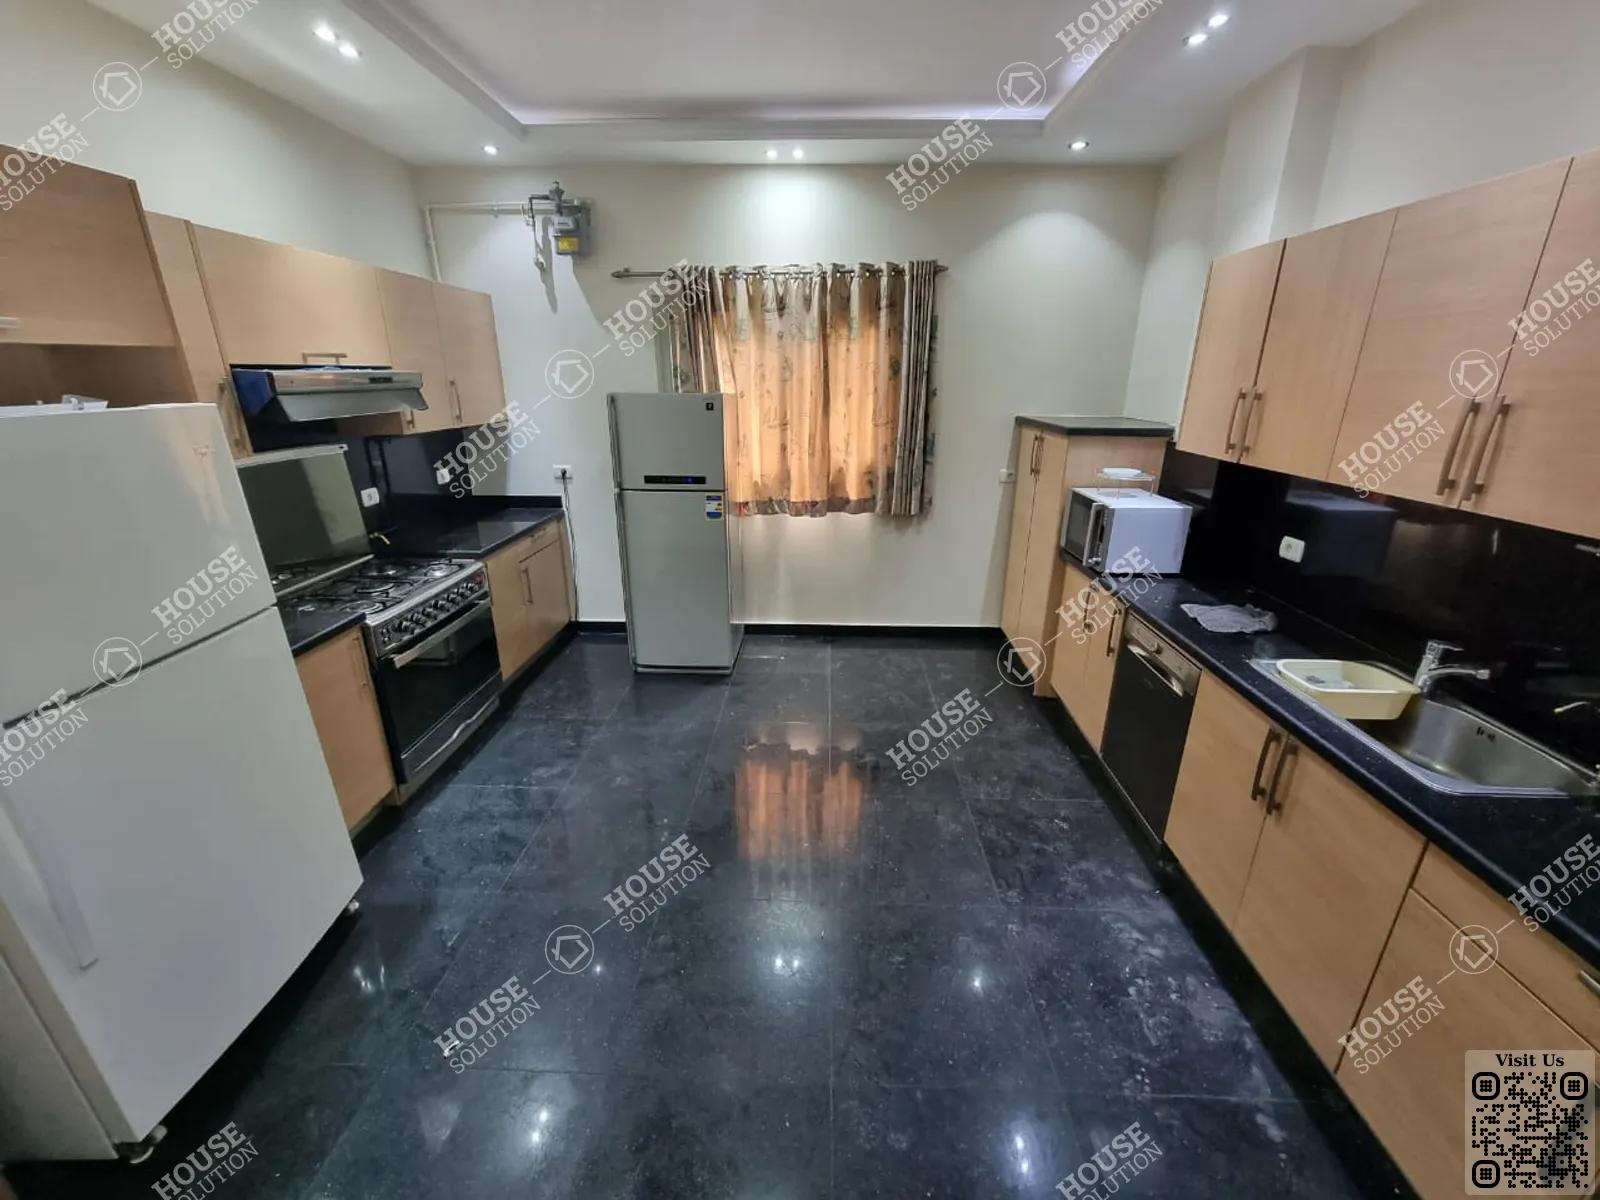 KITCHEN  @ Apartments For Rent In Maadi Maadi Sarayat Area: 350 m² consists of 3 Bedrooms 4 Bathrooms Furnished 5 stars #4897-2